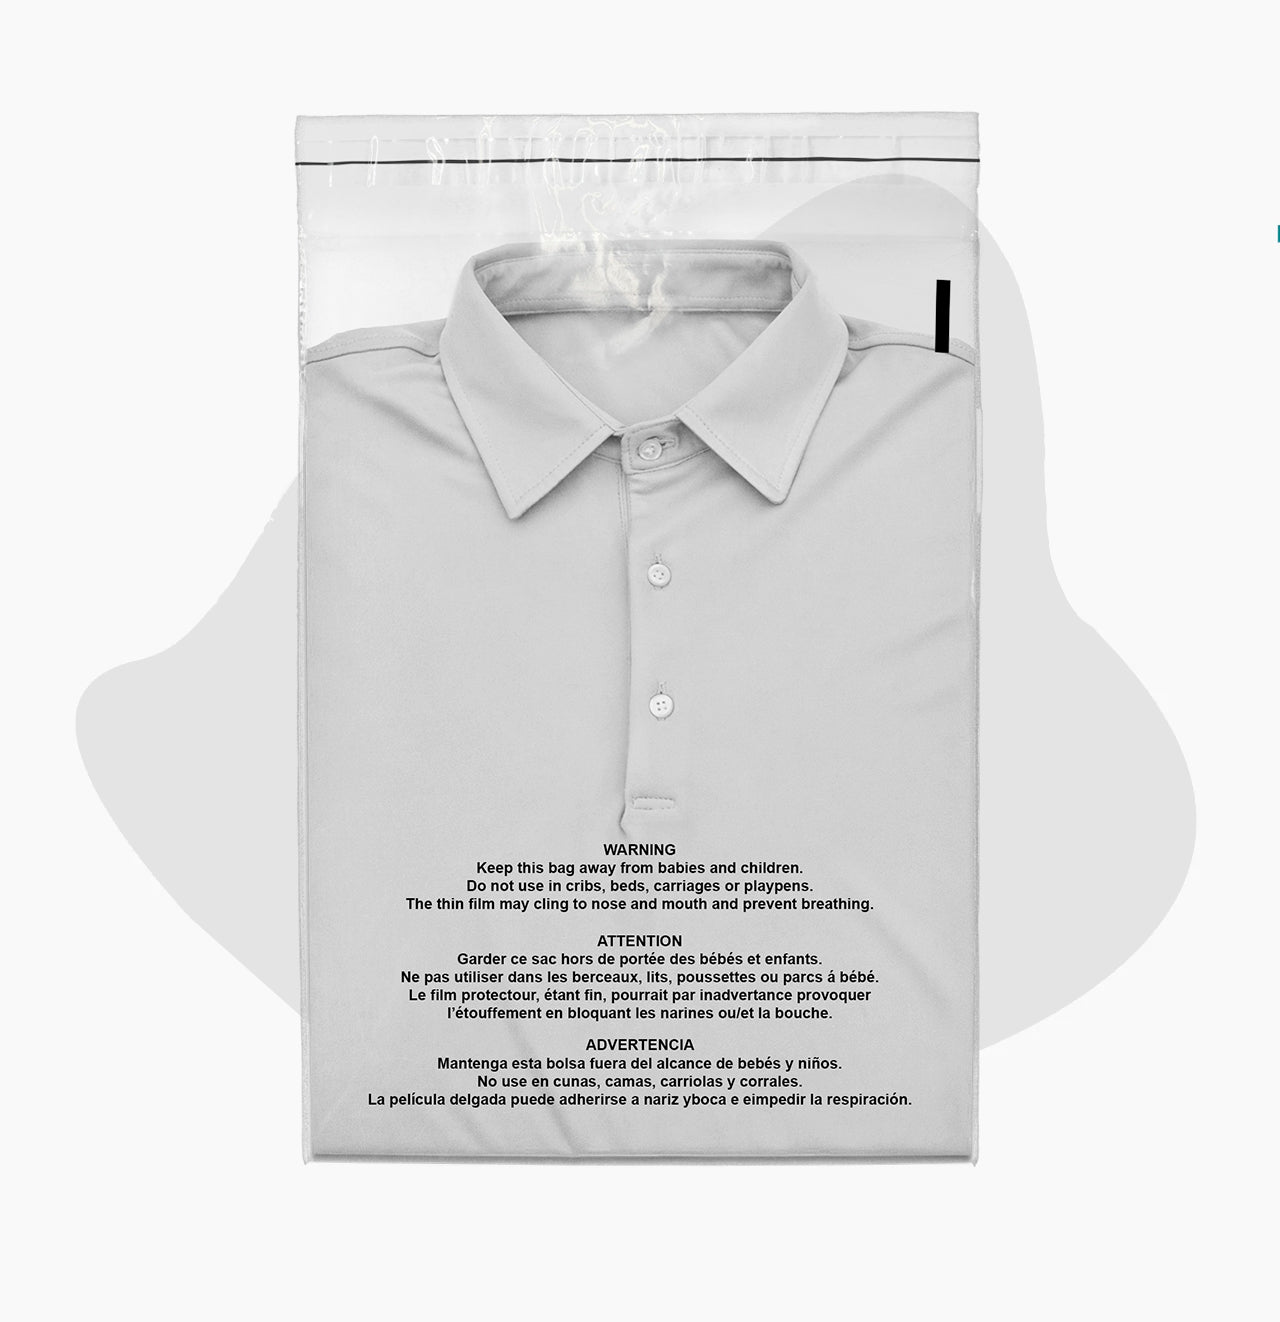 Resealable Reclosable T-Shirt Shipping Packaging 1000 Bags 1.50 Mil Suffocation Warning Universal Packaging Self Seal Clear Plastic Poly Bags 6 x 6” 